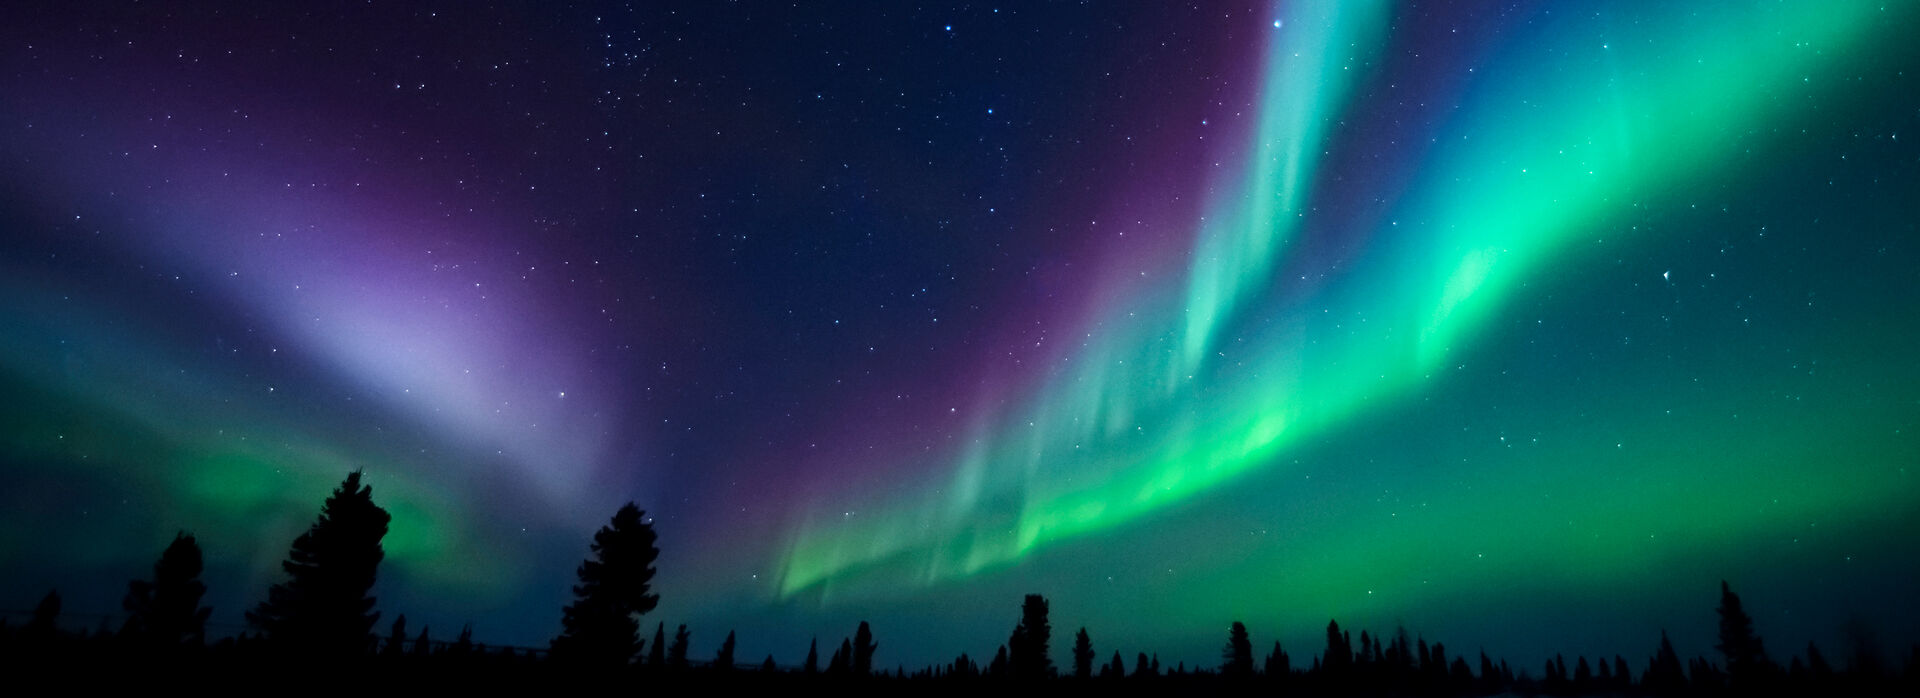 Northern Lights in Canadian skies